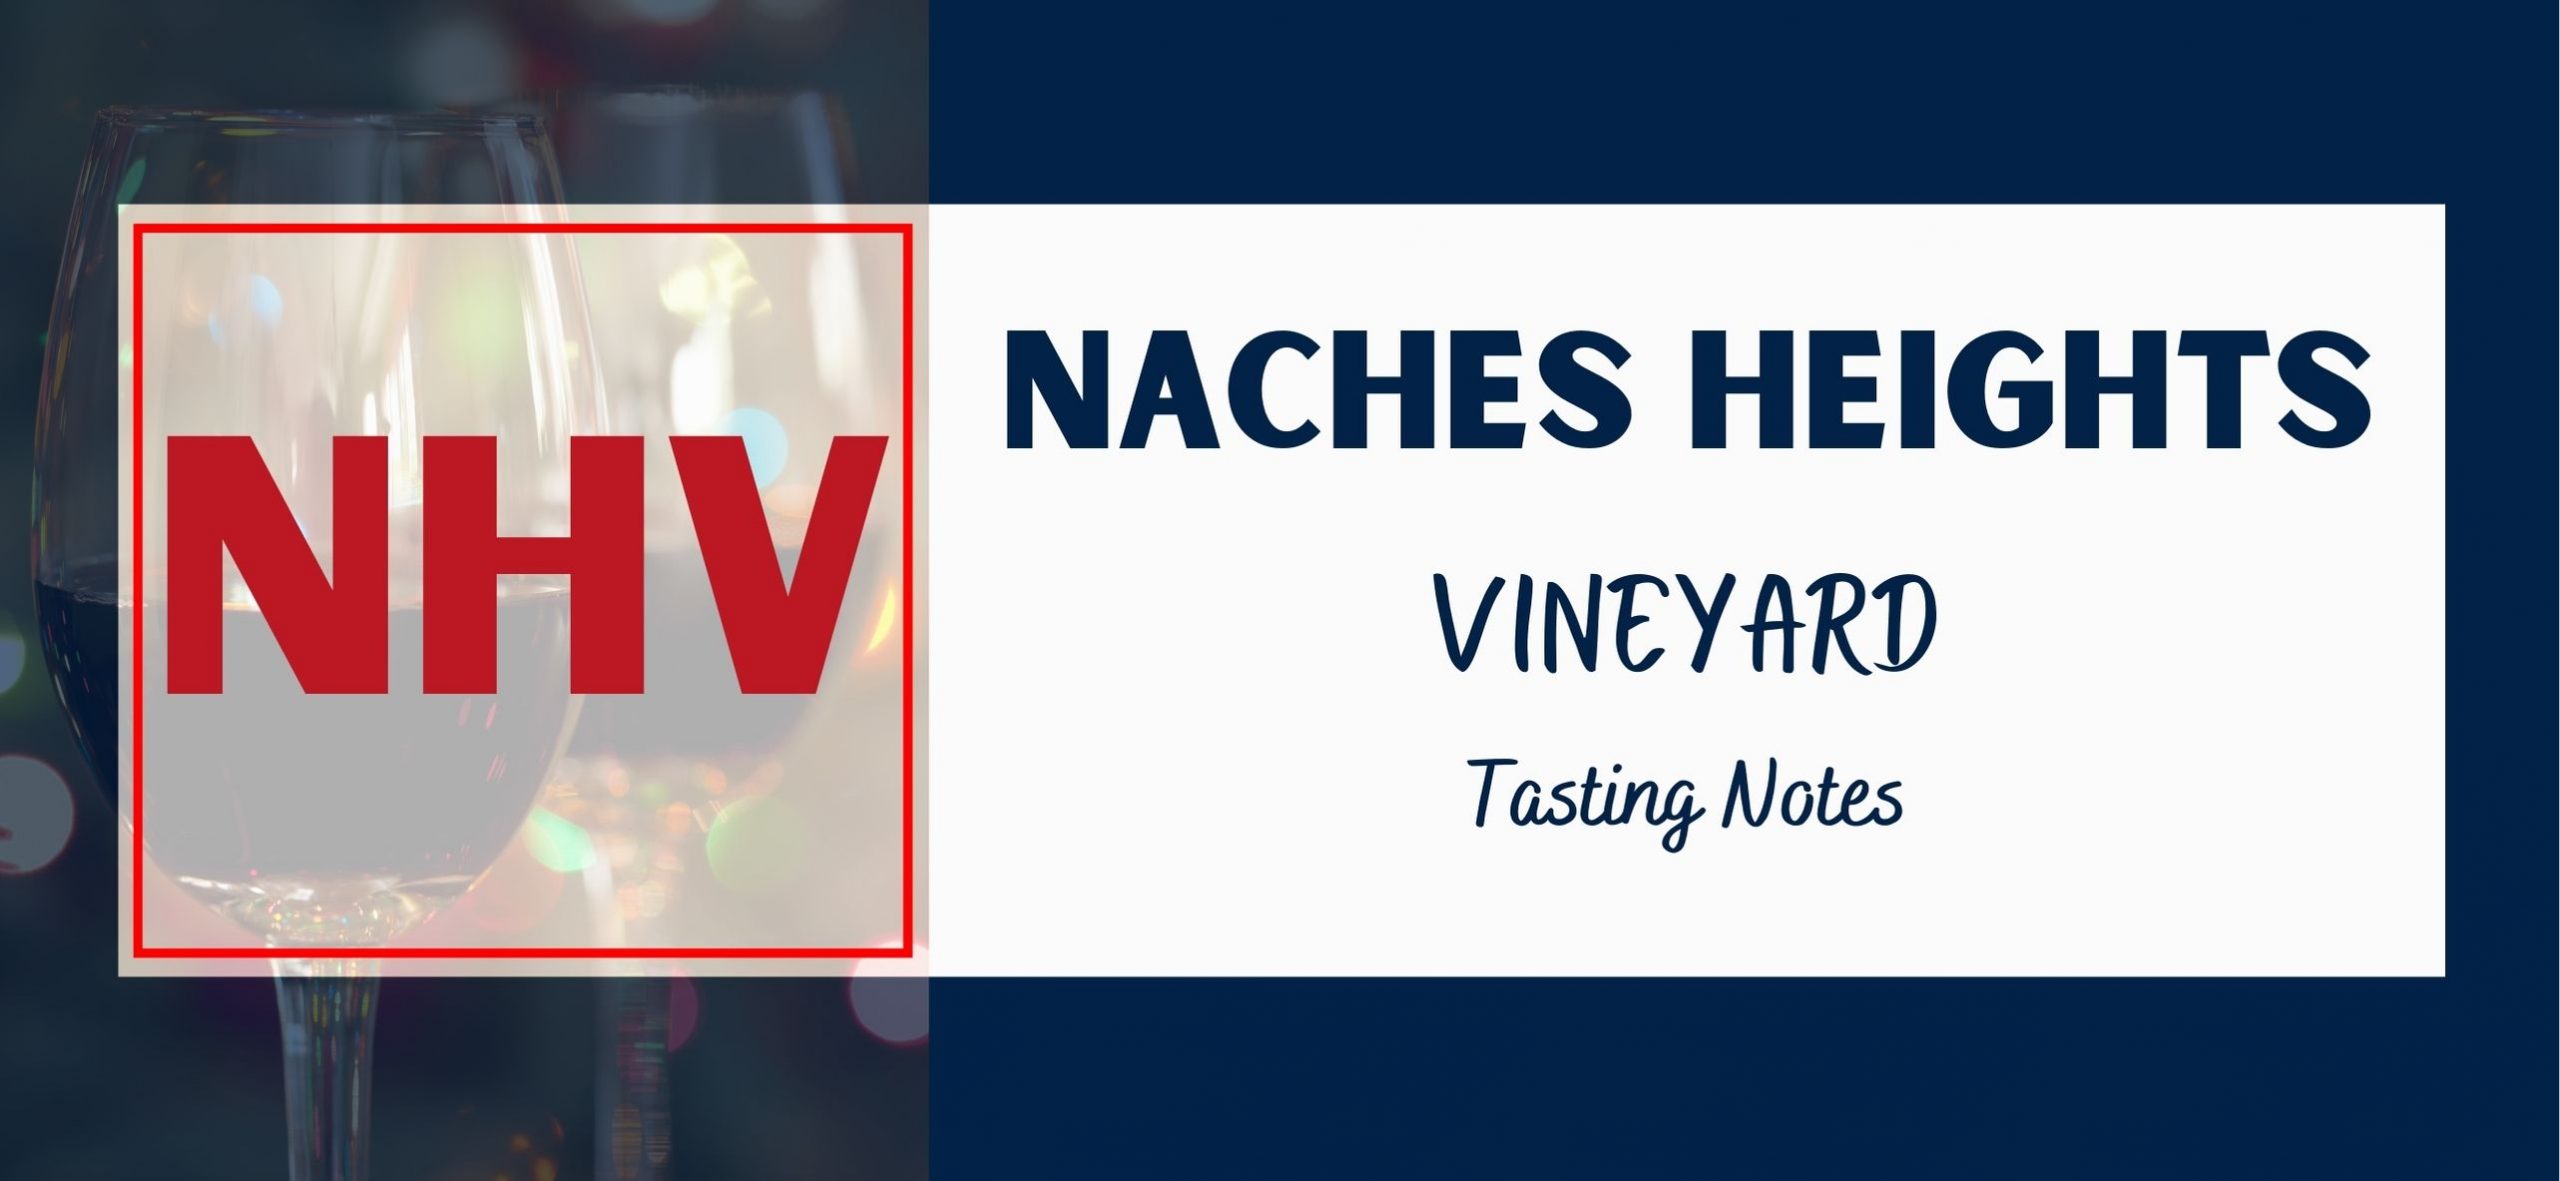 Naches Heights Vineyard reviewed by Windermere Mill Creek